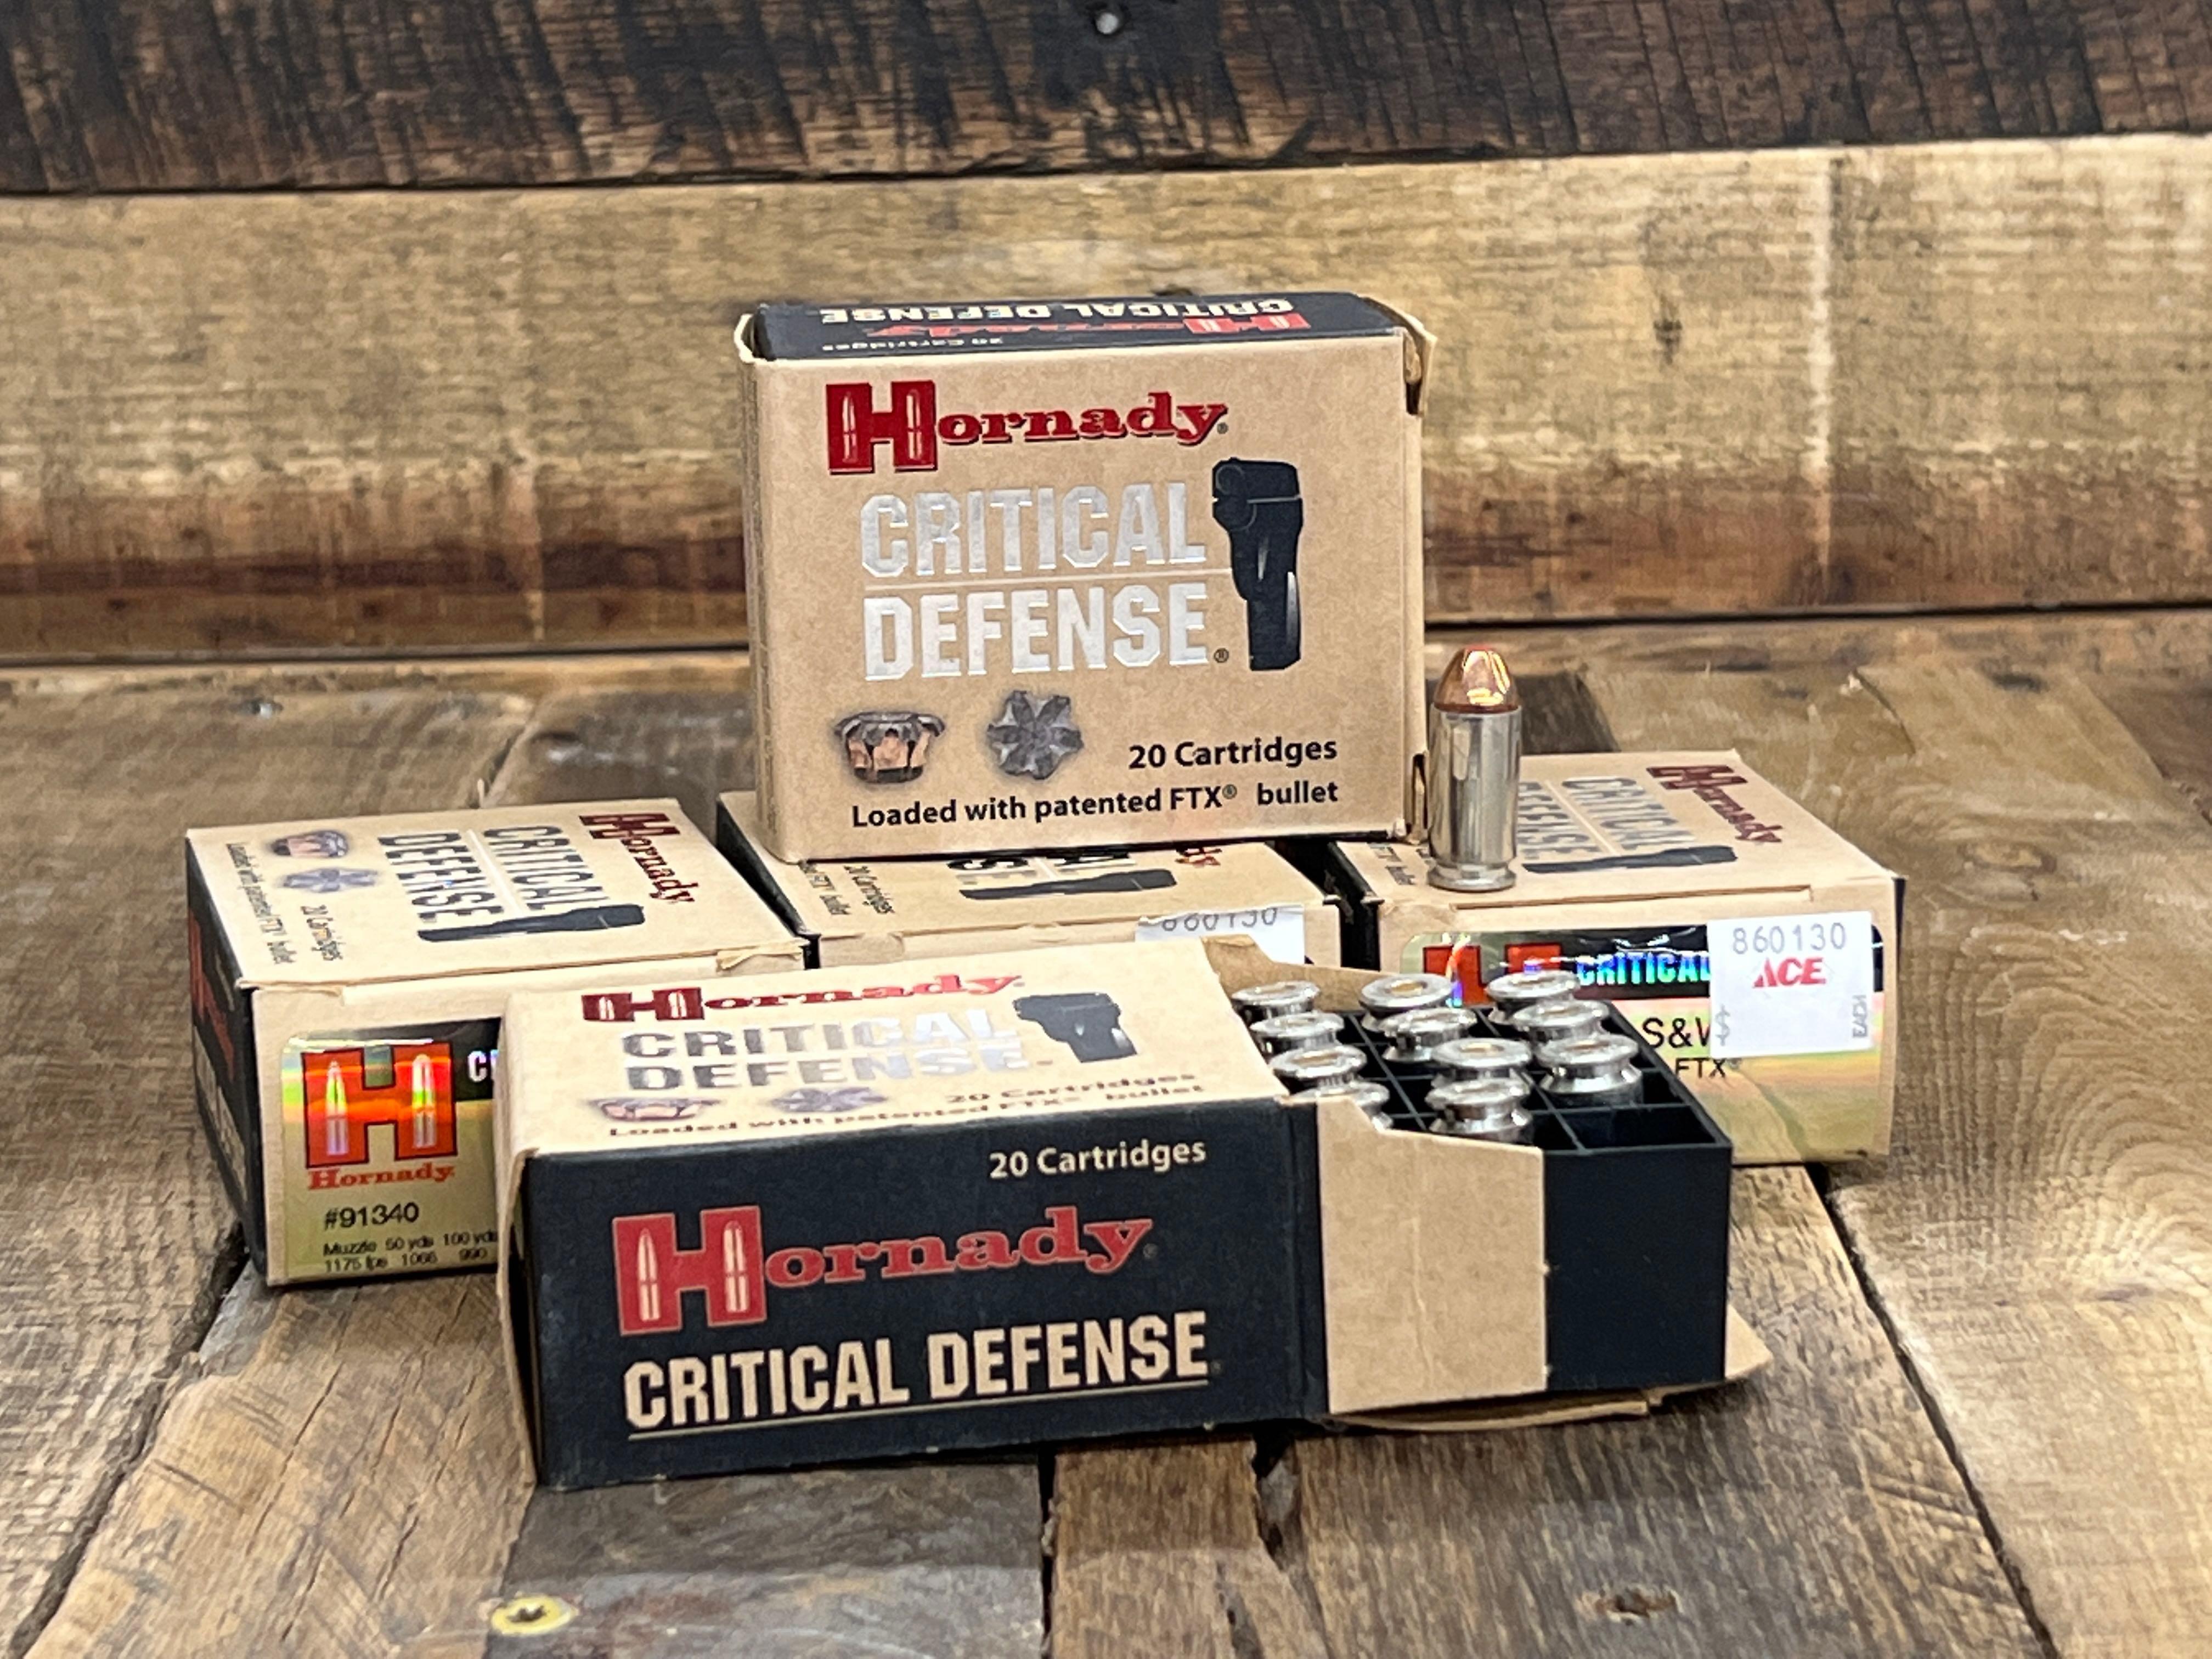 5 BOXES OF HORNADY CRITICAL DEFENSE 40 S&W 165GR. FTX